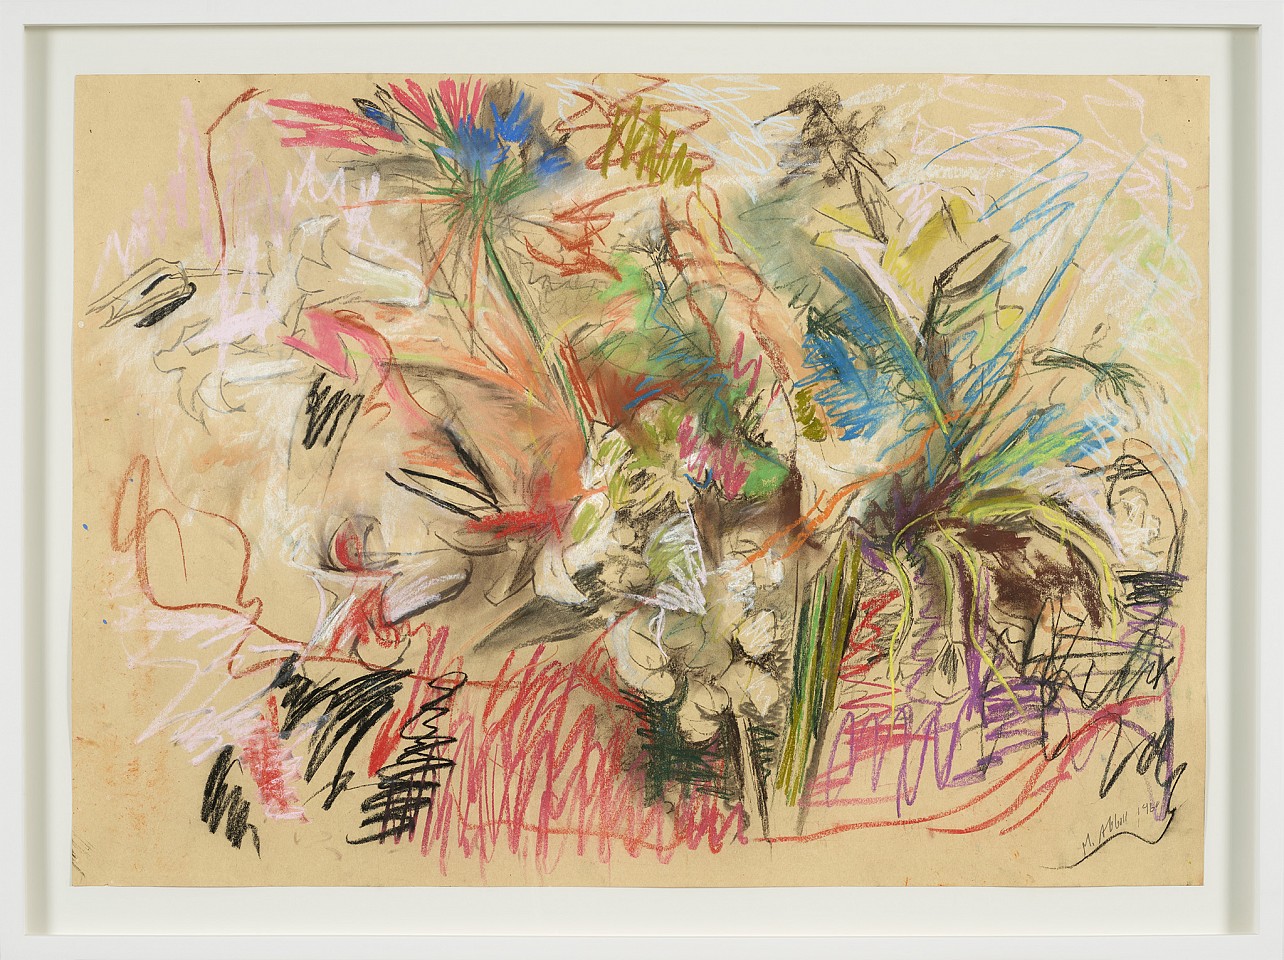 Mary Abbott, Blue Thistle, 1960
Pastel and pencil on paper, 29 3/8 x 41 1/4 in. (74.6 x 104.8 cm)
ABB-00004